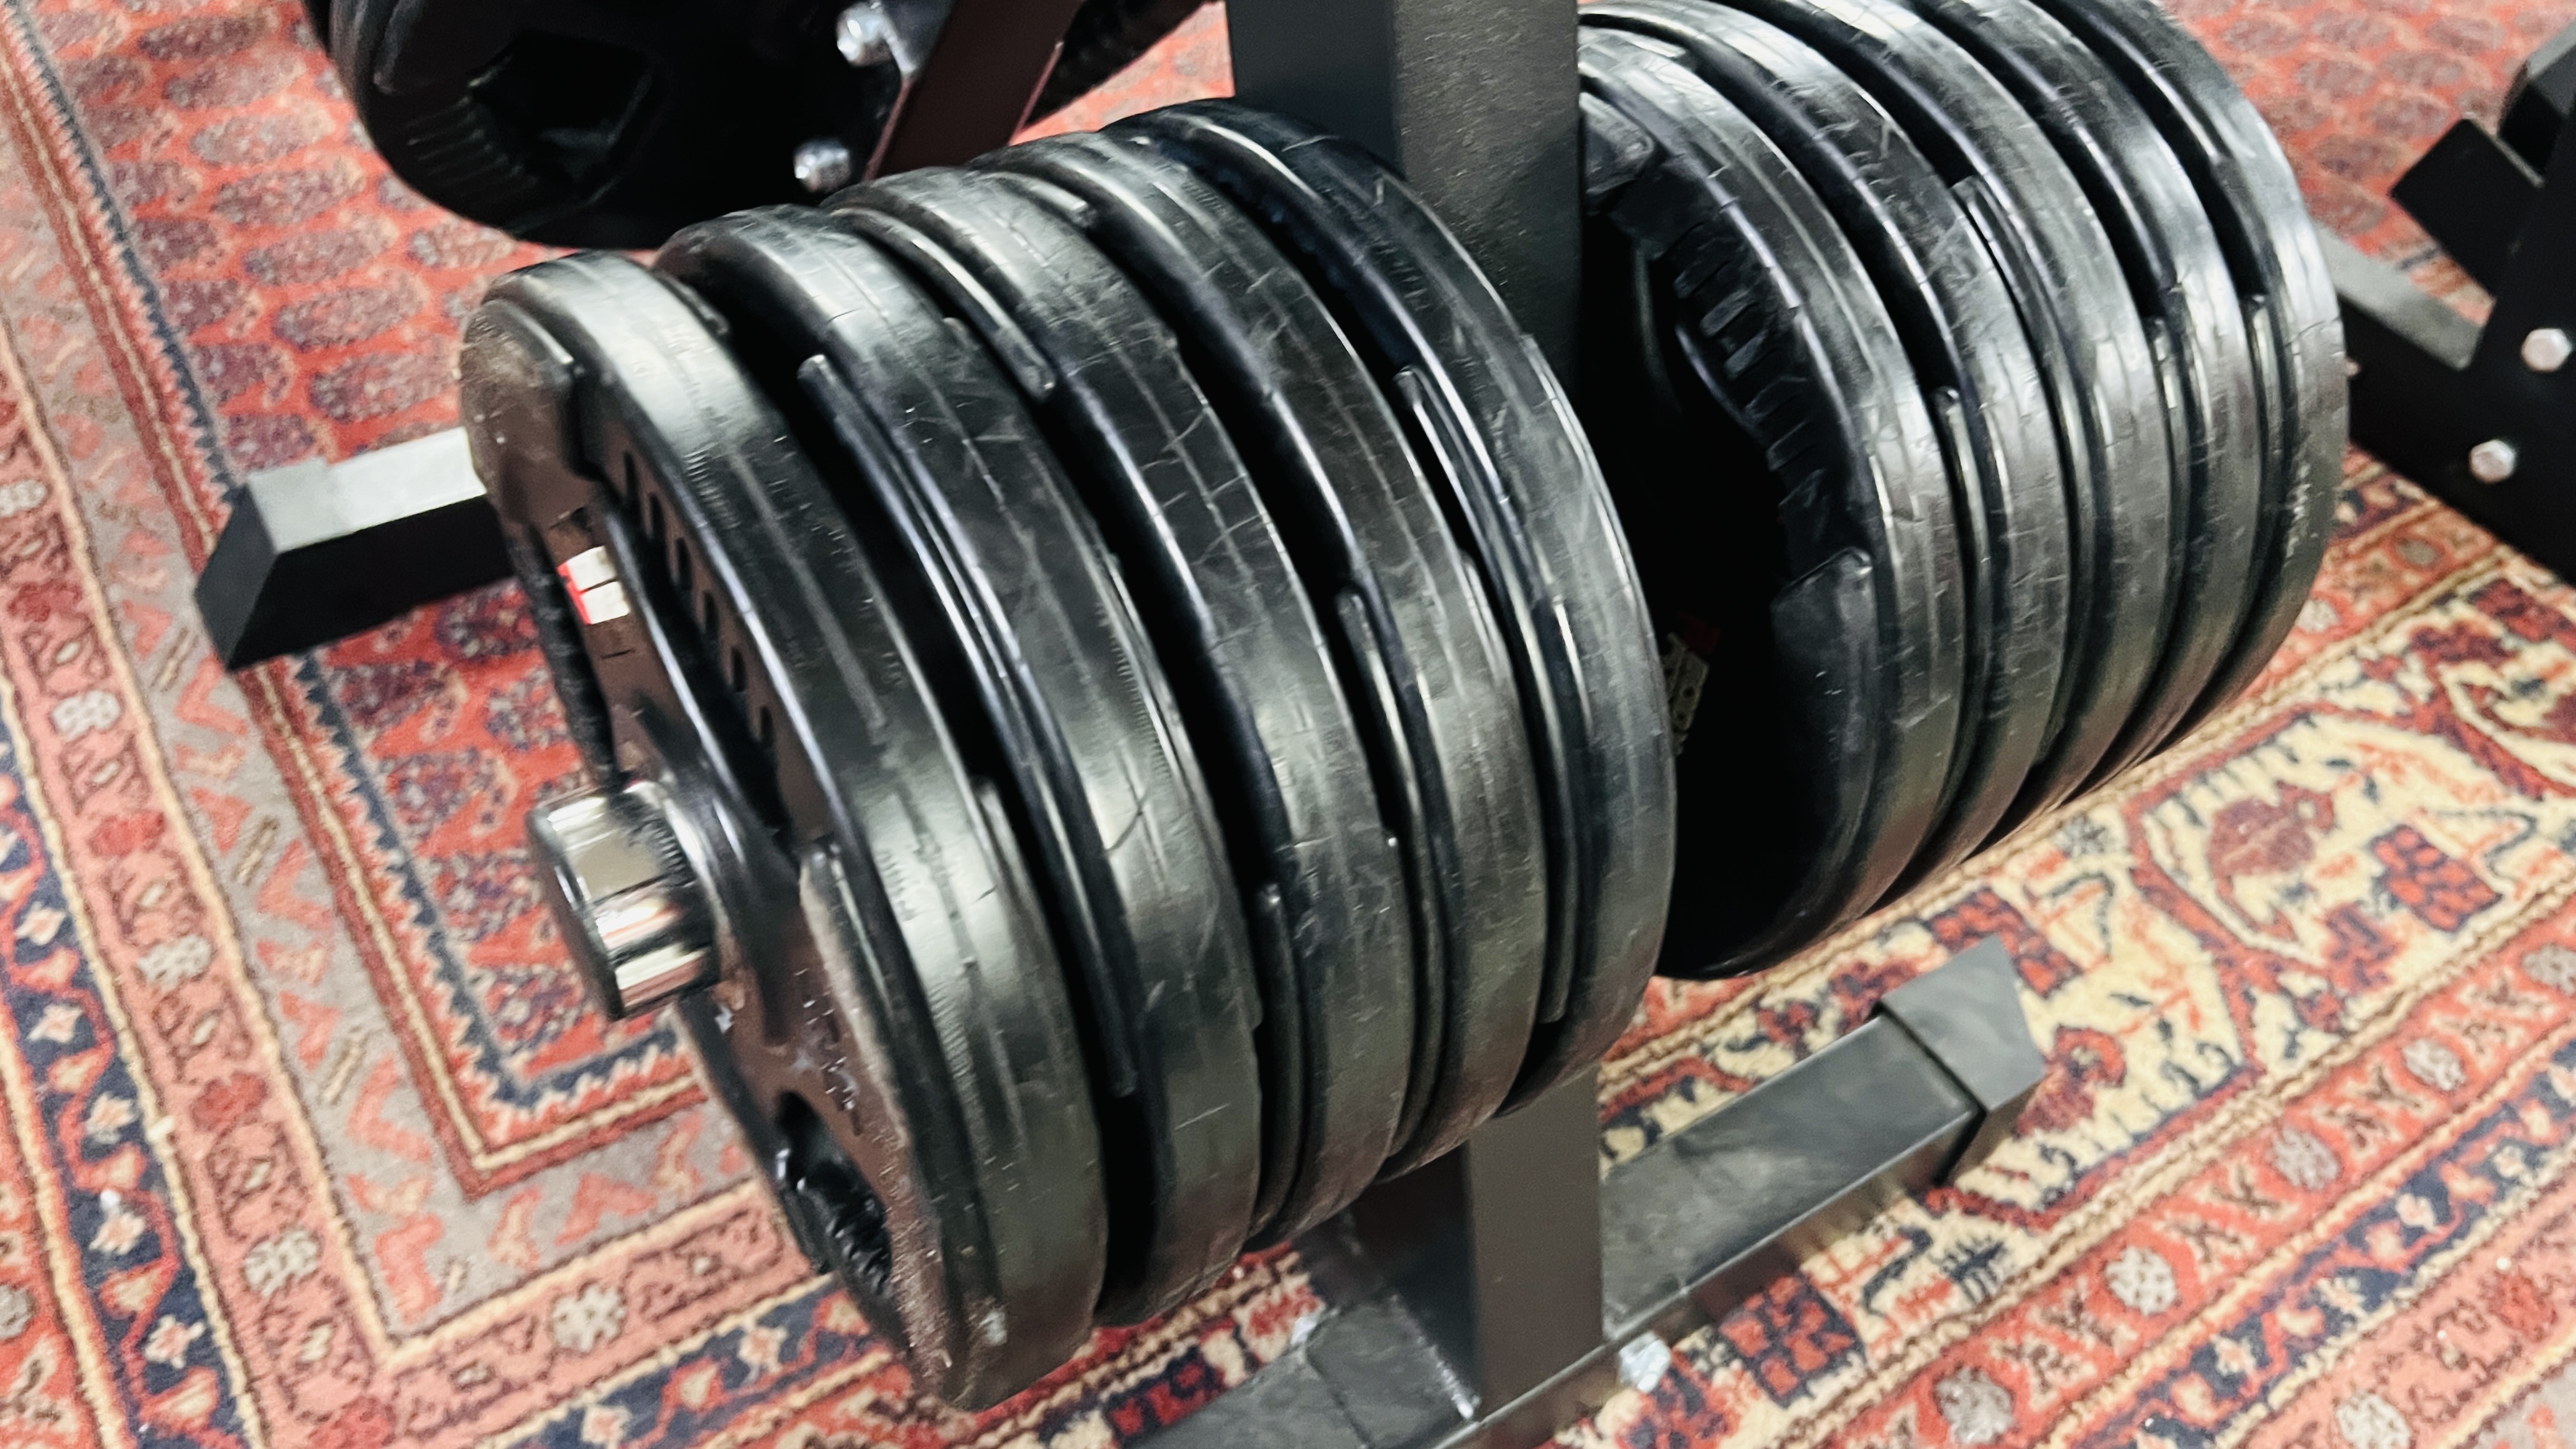 A PROFESSIONAL GYM WEIGHT STAND CONTAINING BODY POWER RUBBER ENCASED TRI-GRIP OLYMPIC DISC WEIGHTS - Image 5 of 5